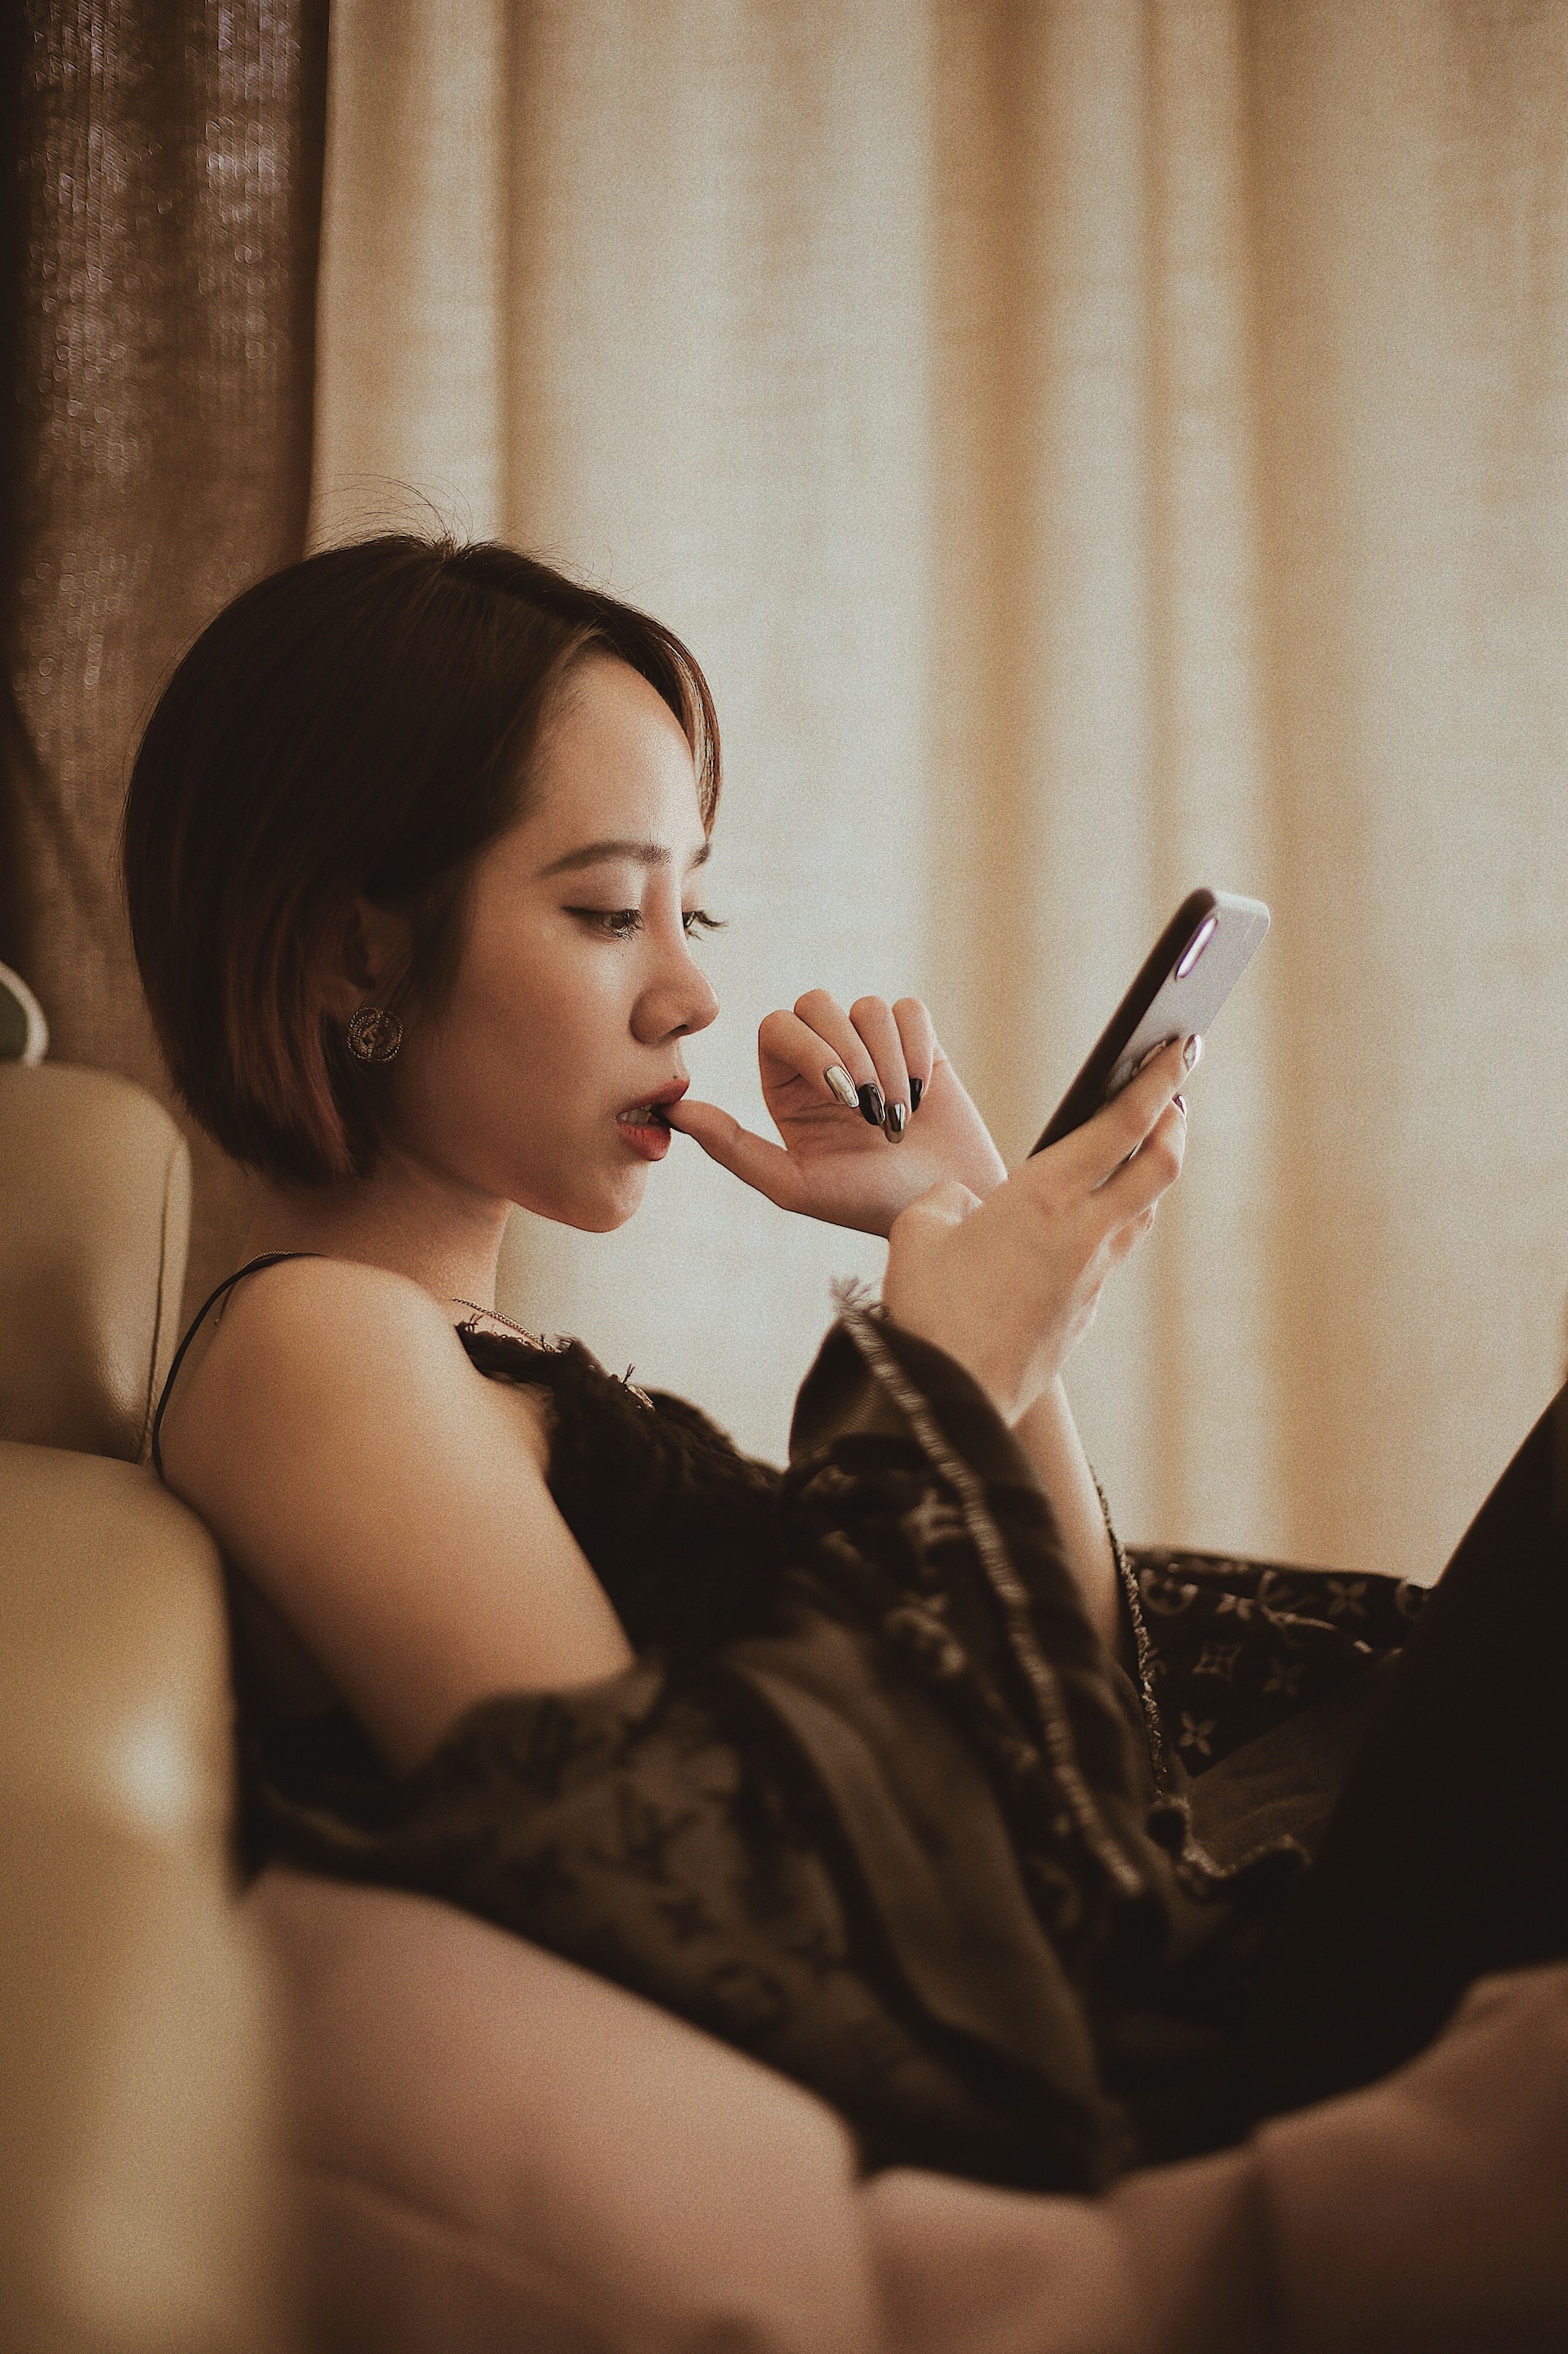 A woman using a phone | Source: Pexels